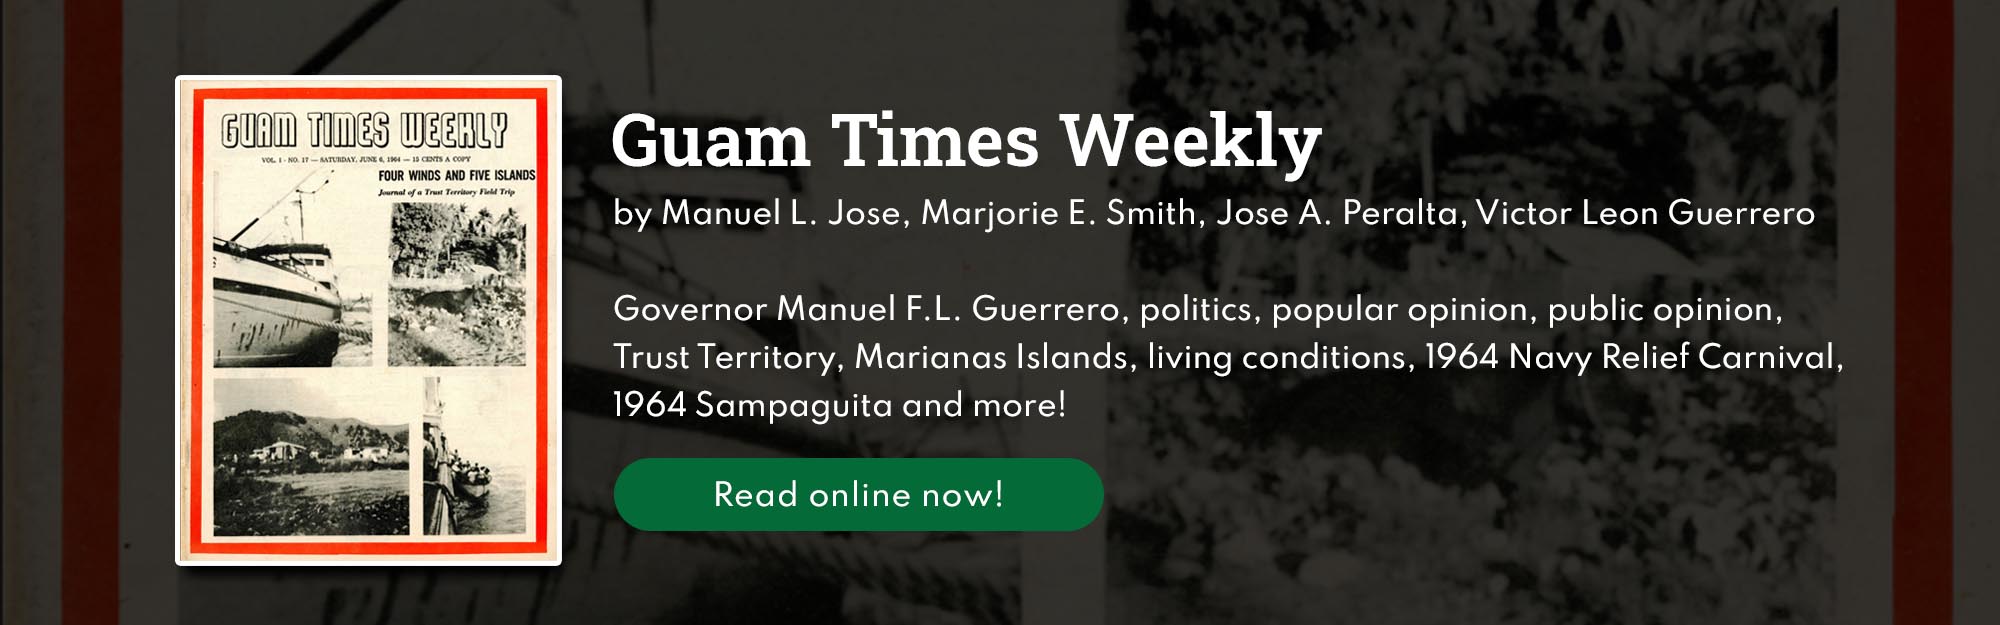 Guam Times Weekly banner